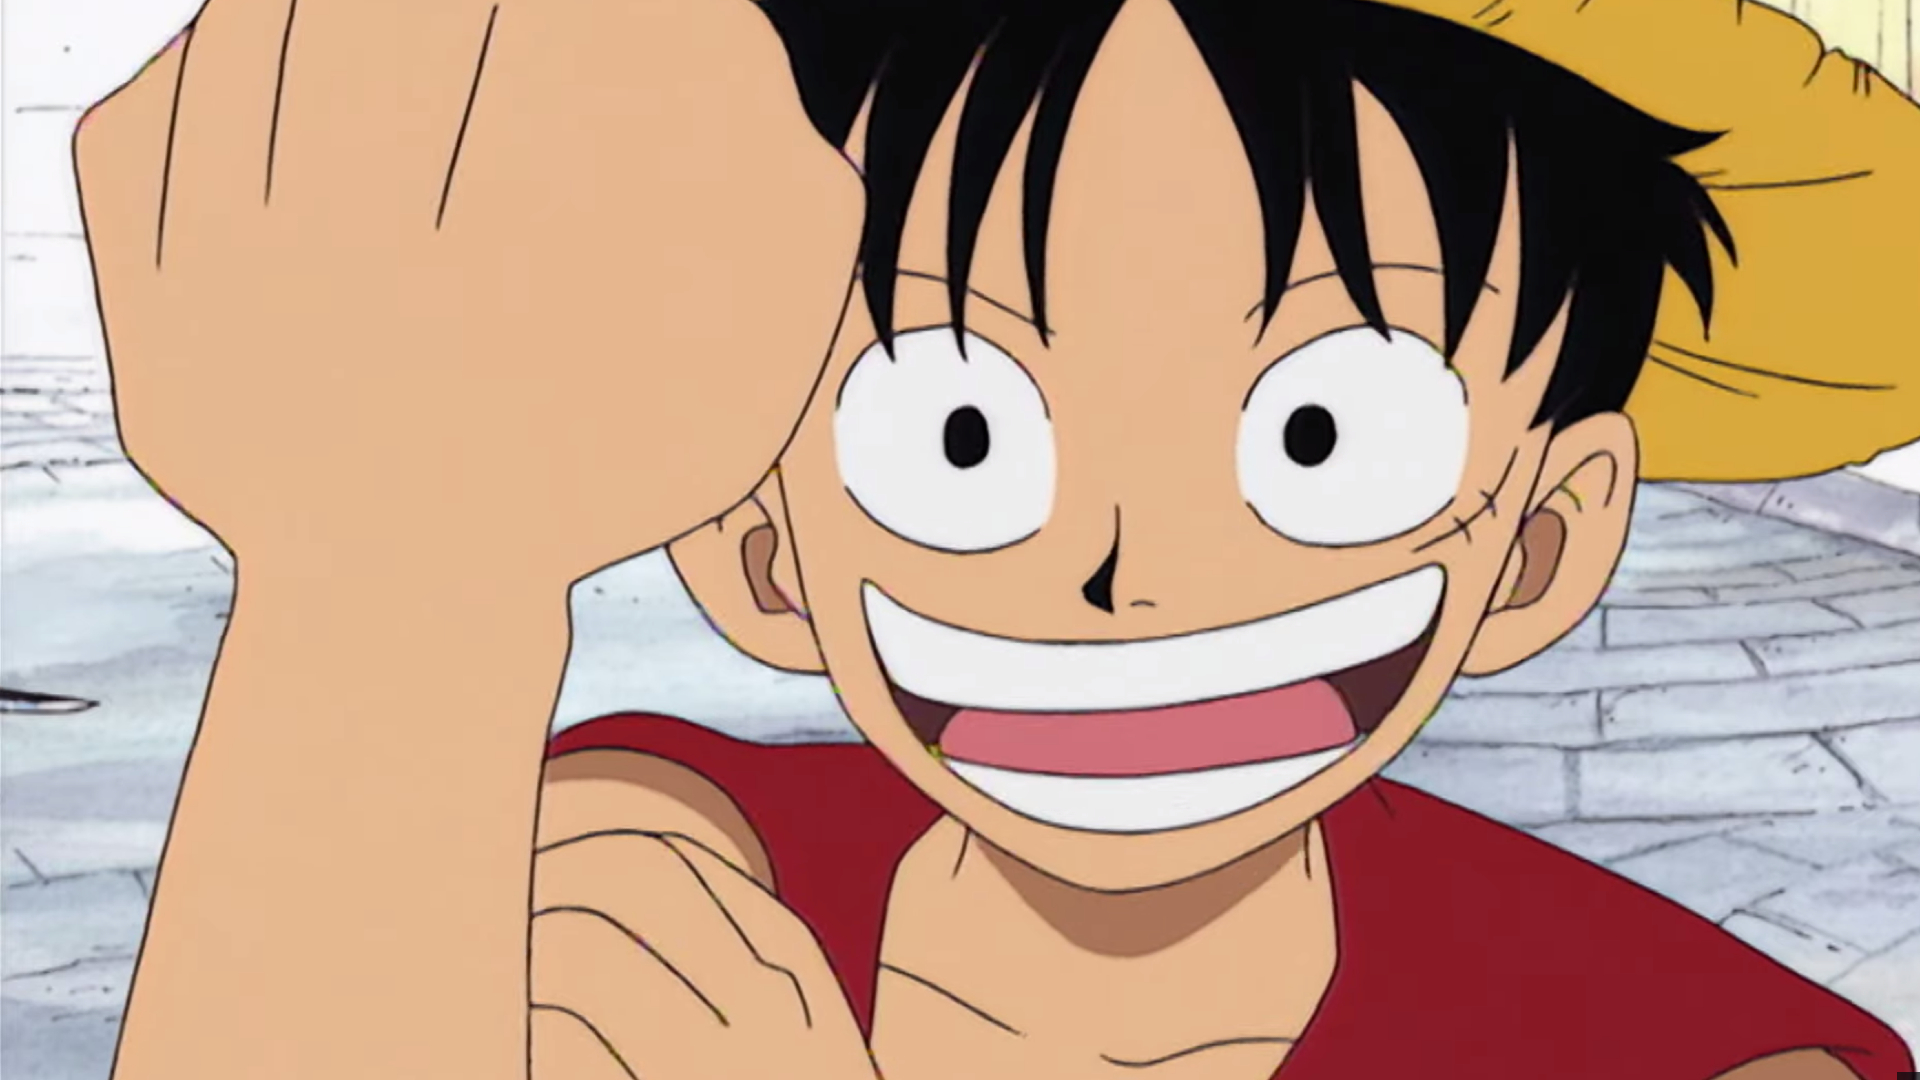 One Piece Episode 1062 Watch Online, Release Date, Time, Preview, and More